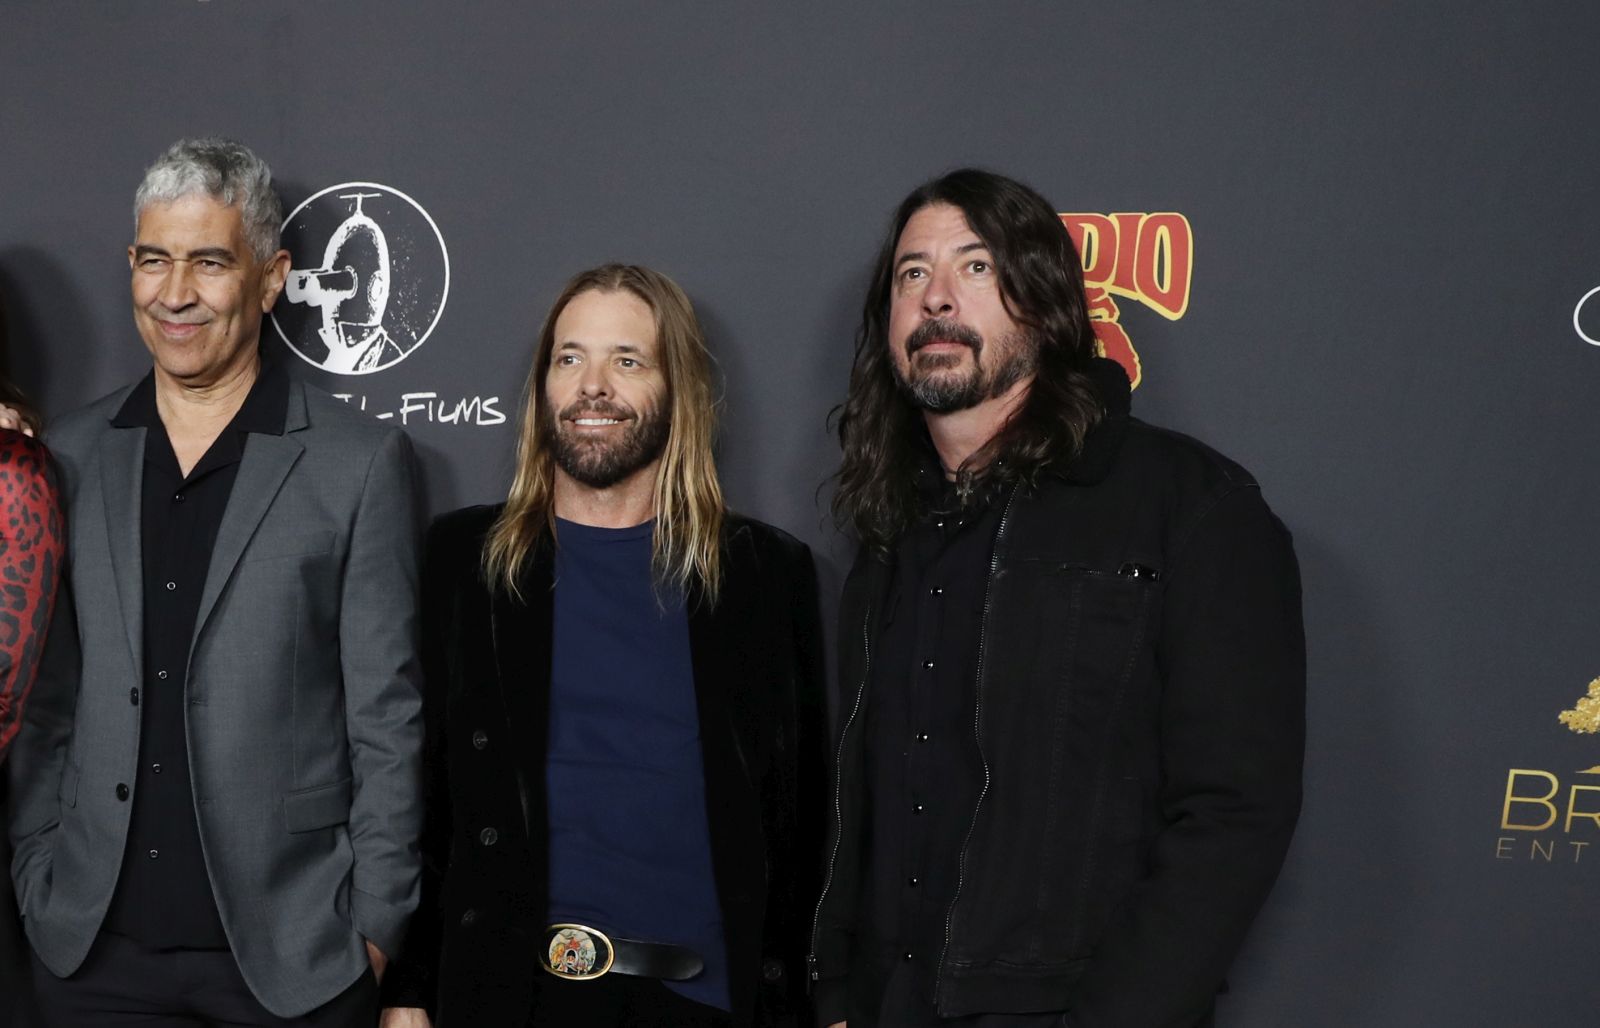 epa09764501 (L-R) US musicians Rami Jaffee, Chris Shiflett, Nate Mendel, US comedian Whitney Cummings, US musicians Pat Smear, Taylor Hawkins, and Dave Grohl, attend the premiere of the movie 'Studio 666' at the TCL Chinese Theater in Los Angeles, California, USA, 16 February 2022.  EPA/CAROLINE BREHMAN